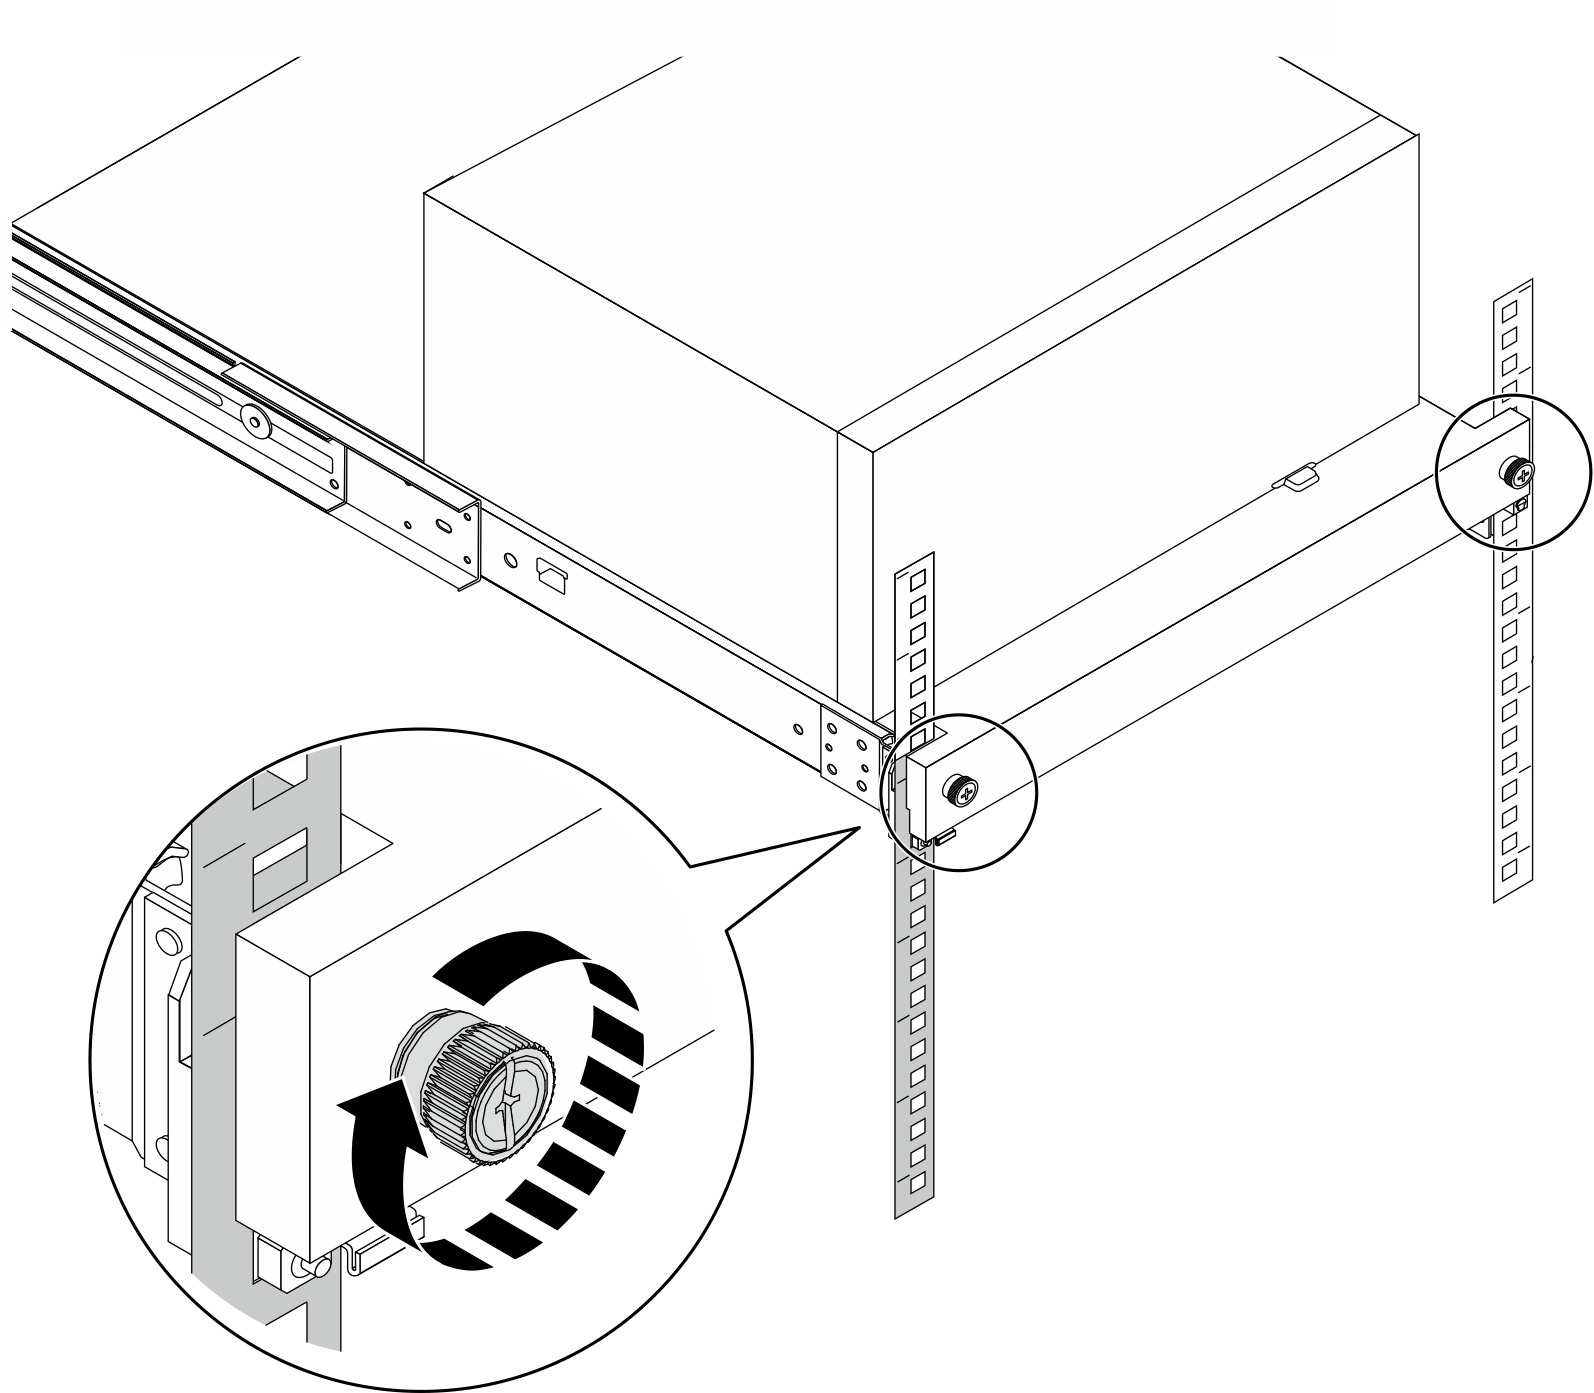 Securing the tray with screws